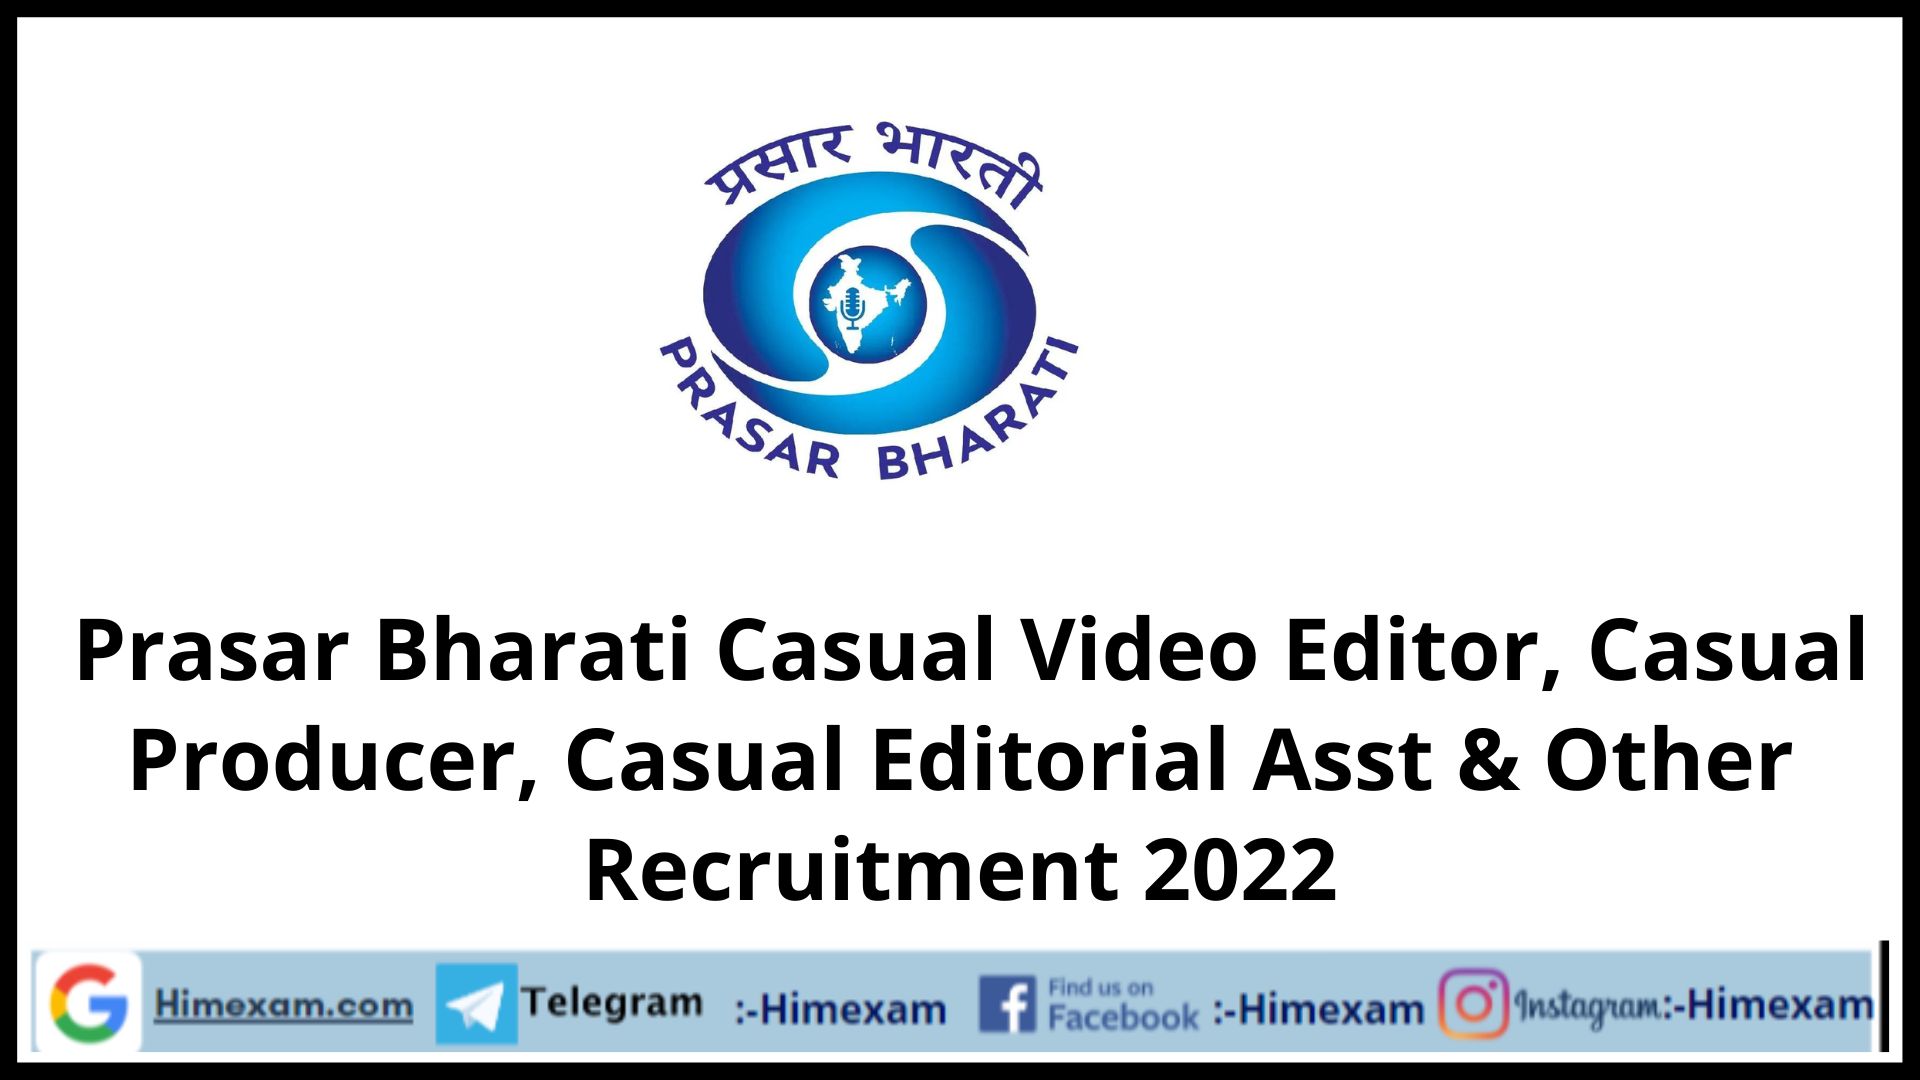 Prasar Bharati Casual Video Editor, Casual Producer, Casual Editorial Asst & Other Recruitment 2022